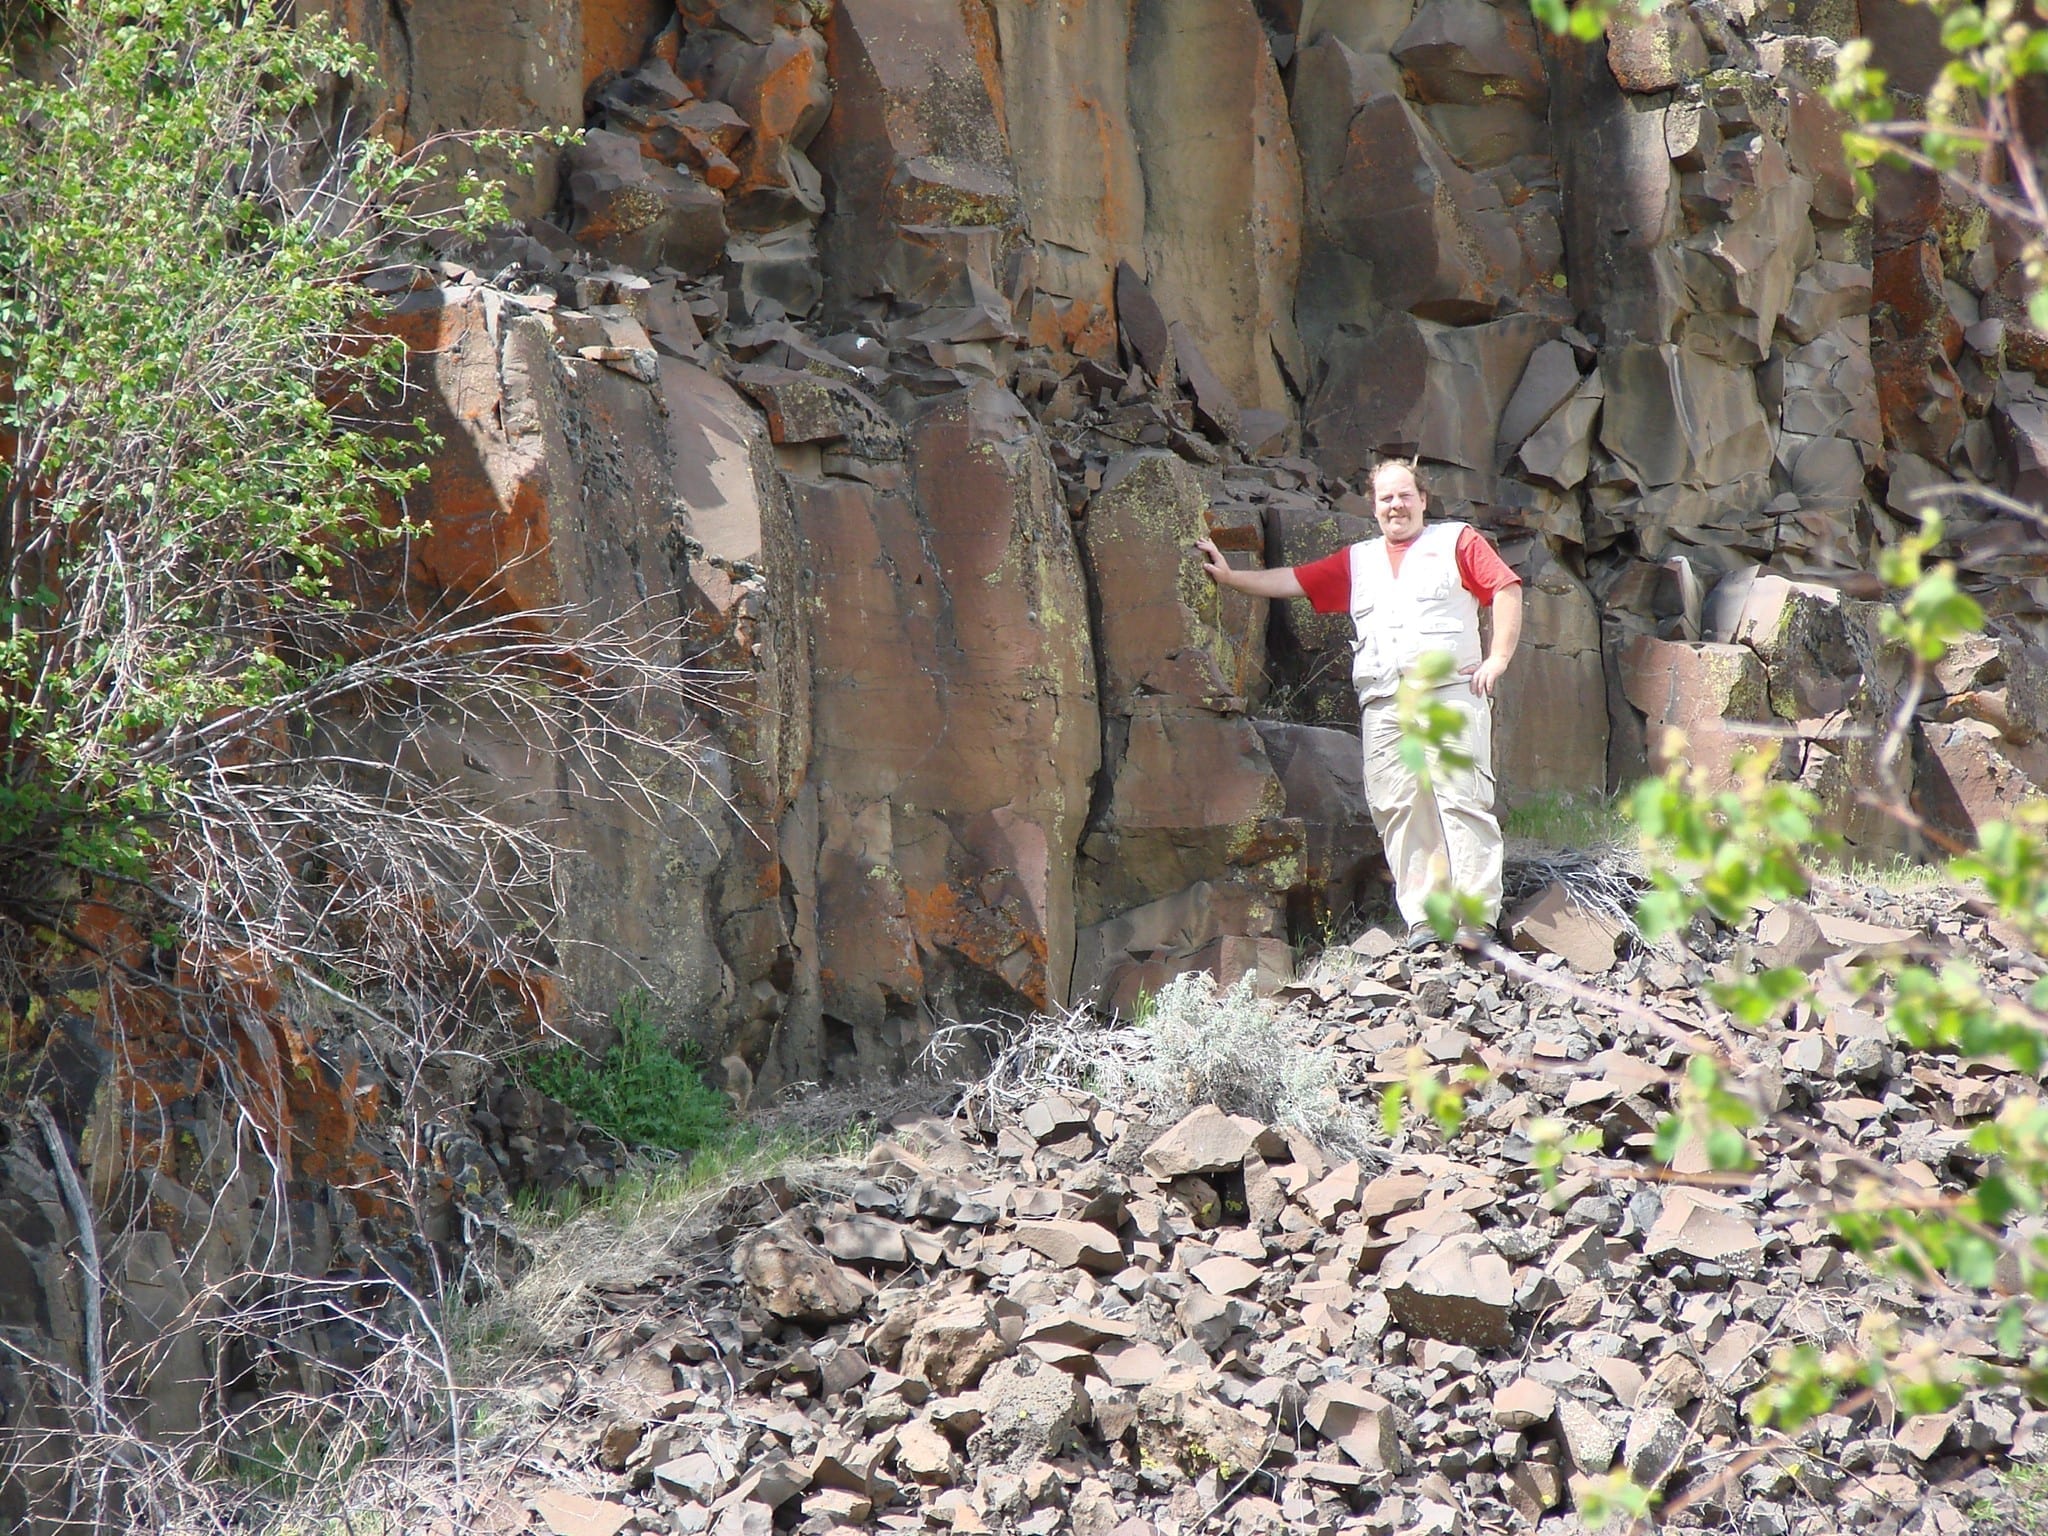 Lava rock face with a man showing scale, photo credit: Ian Juby